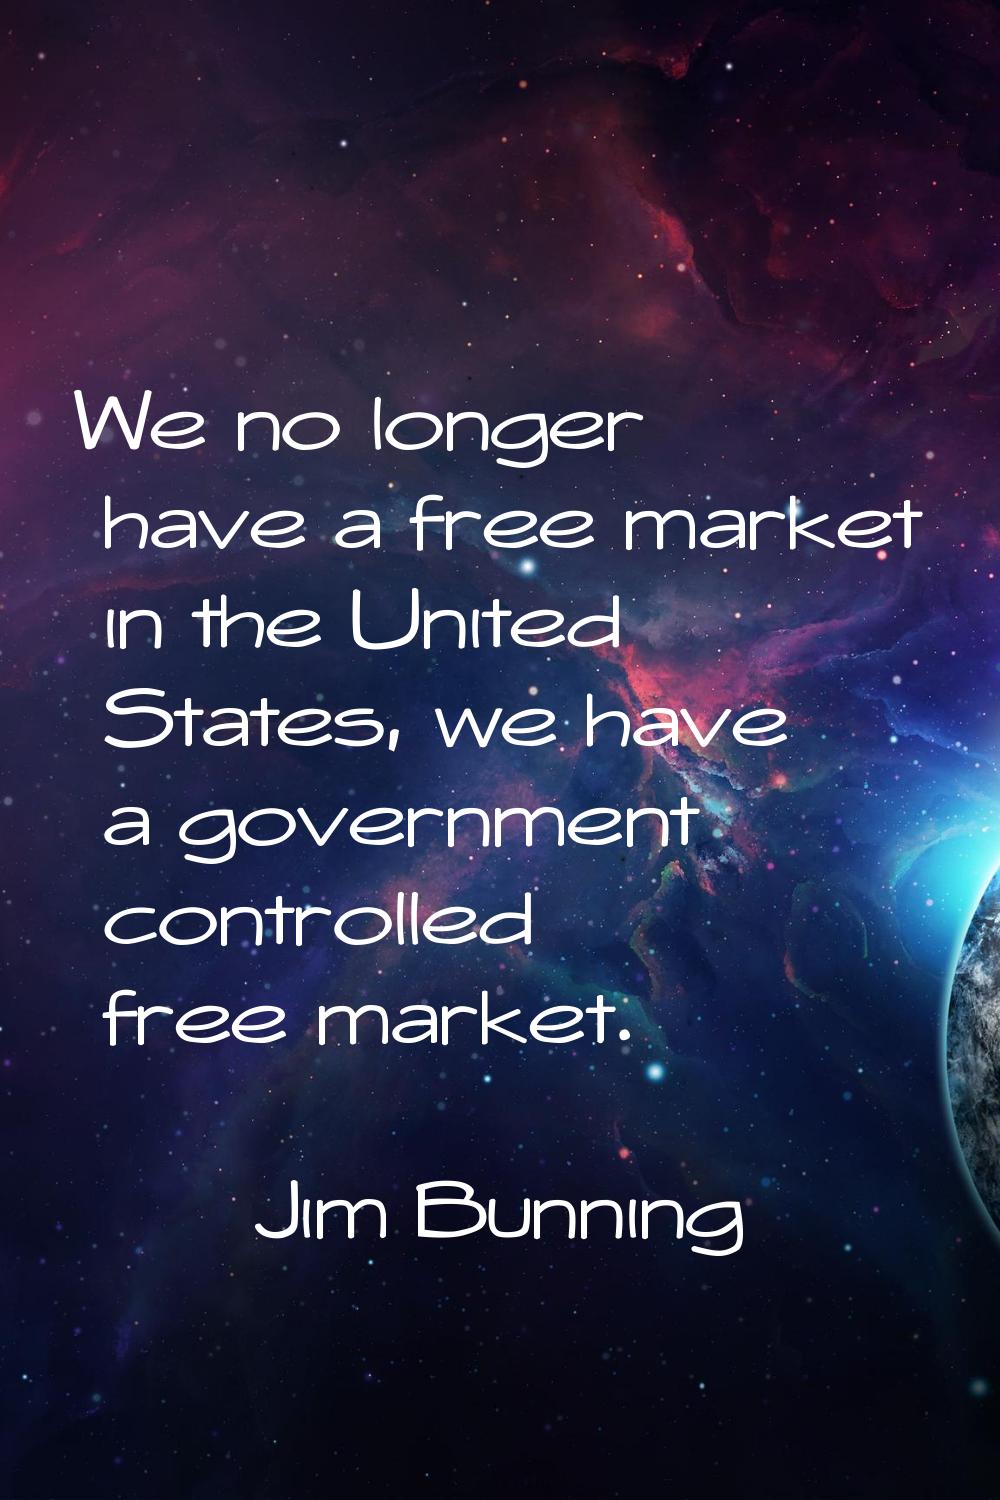 We no longer have a free market in the United States, we have a government controlled free market.